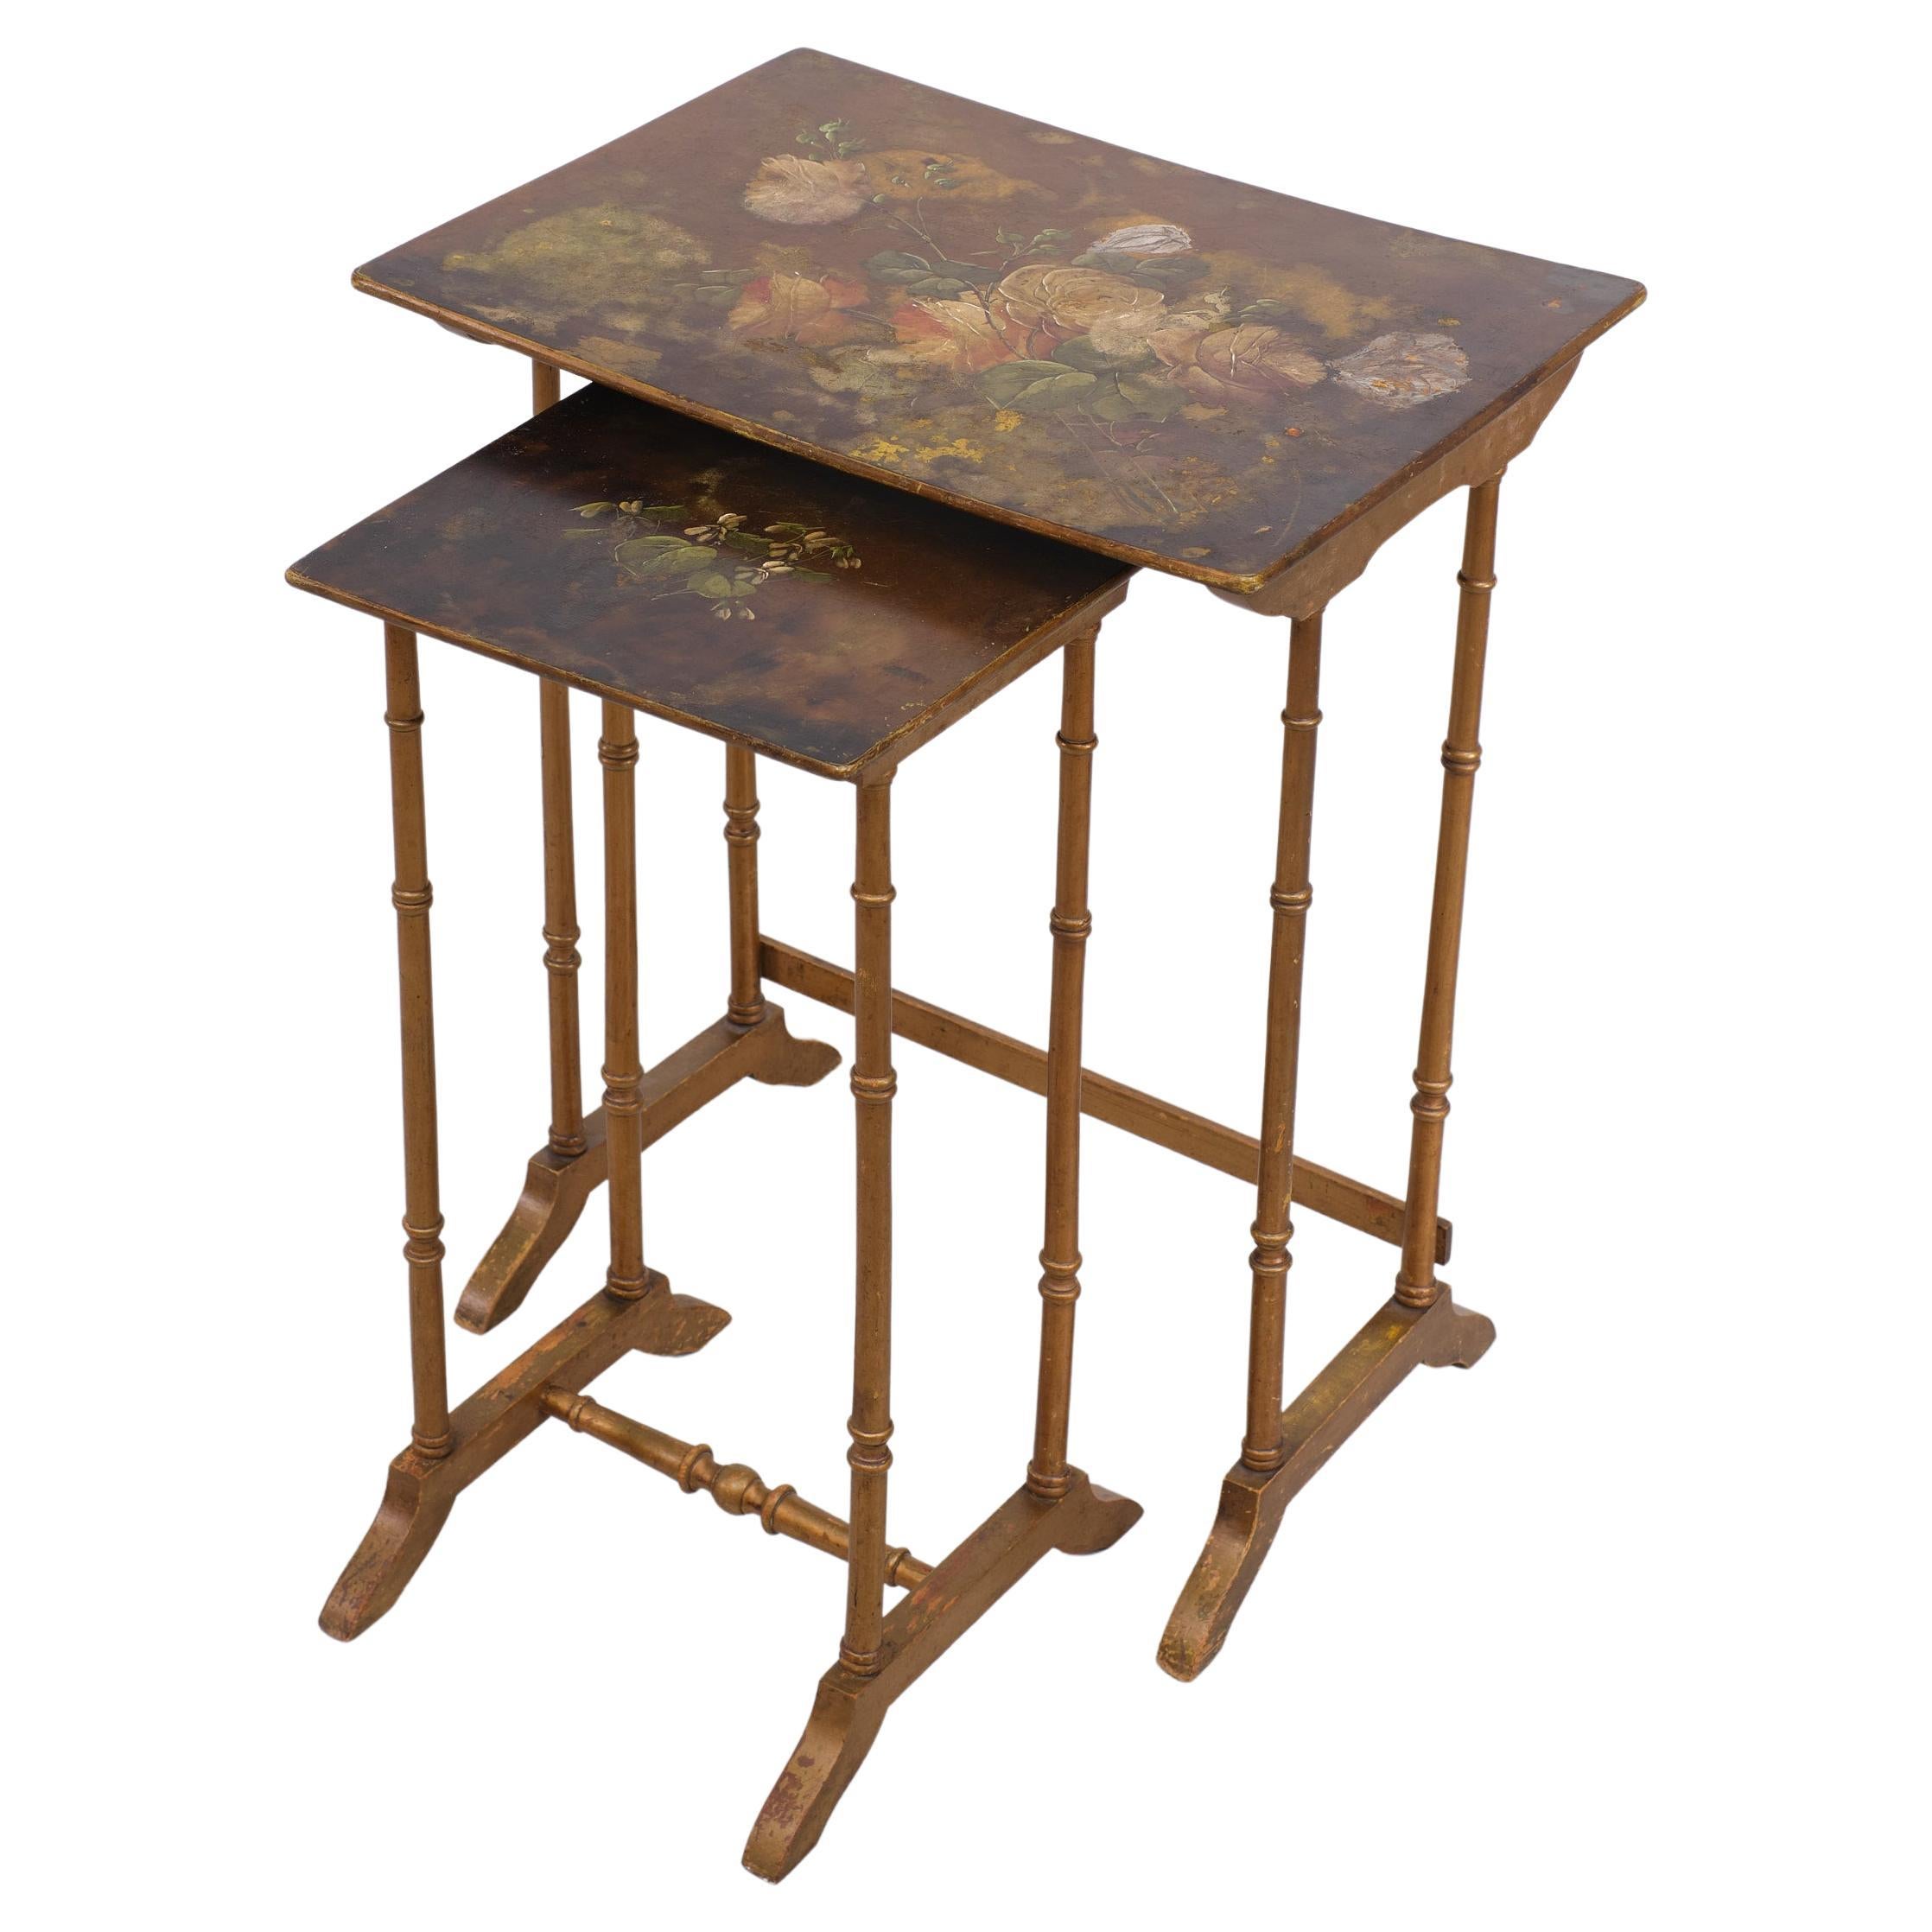 Two very nice Art Nouveau side table. Hand painted Flowers on the tops. These tables are in a distressed condition. In a Japonisme style love this. 
Structural sound.